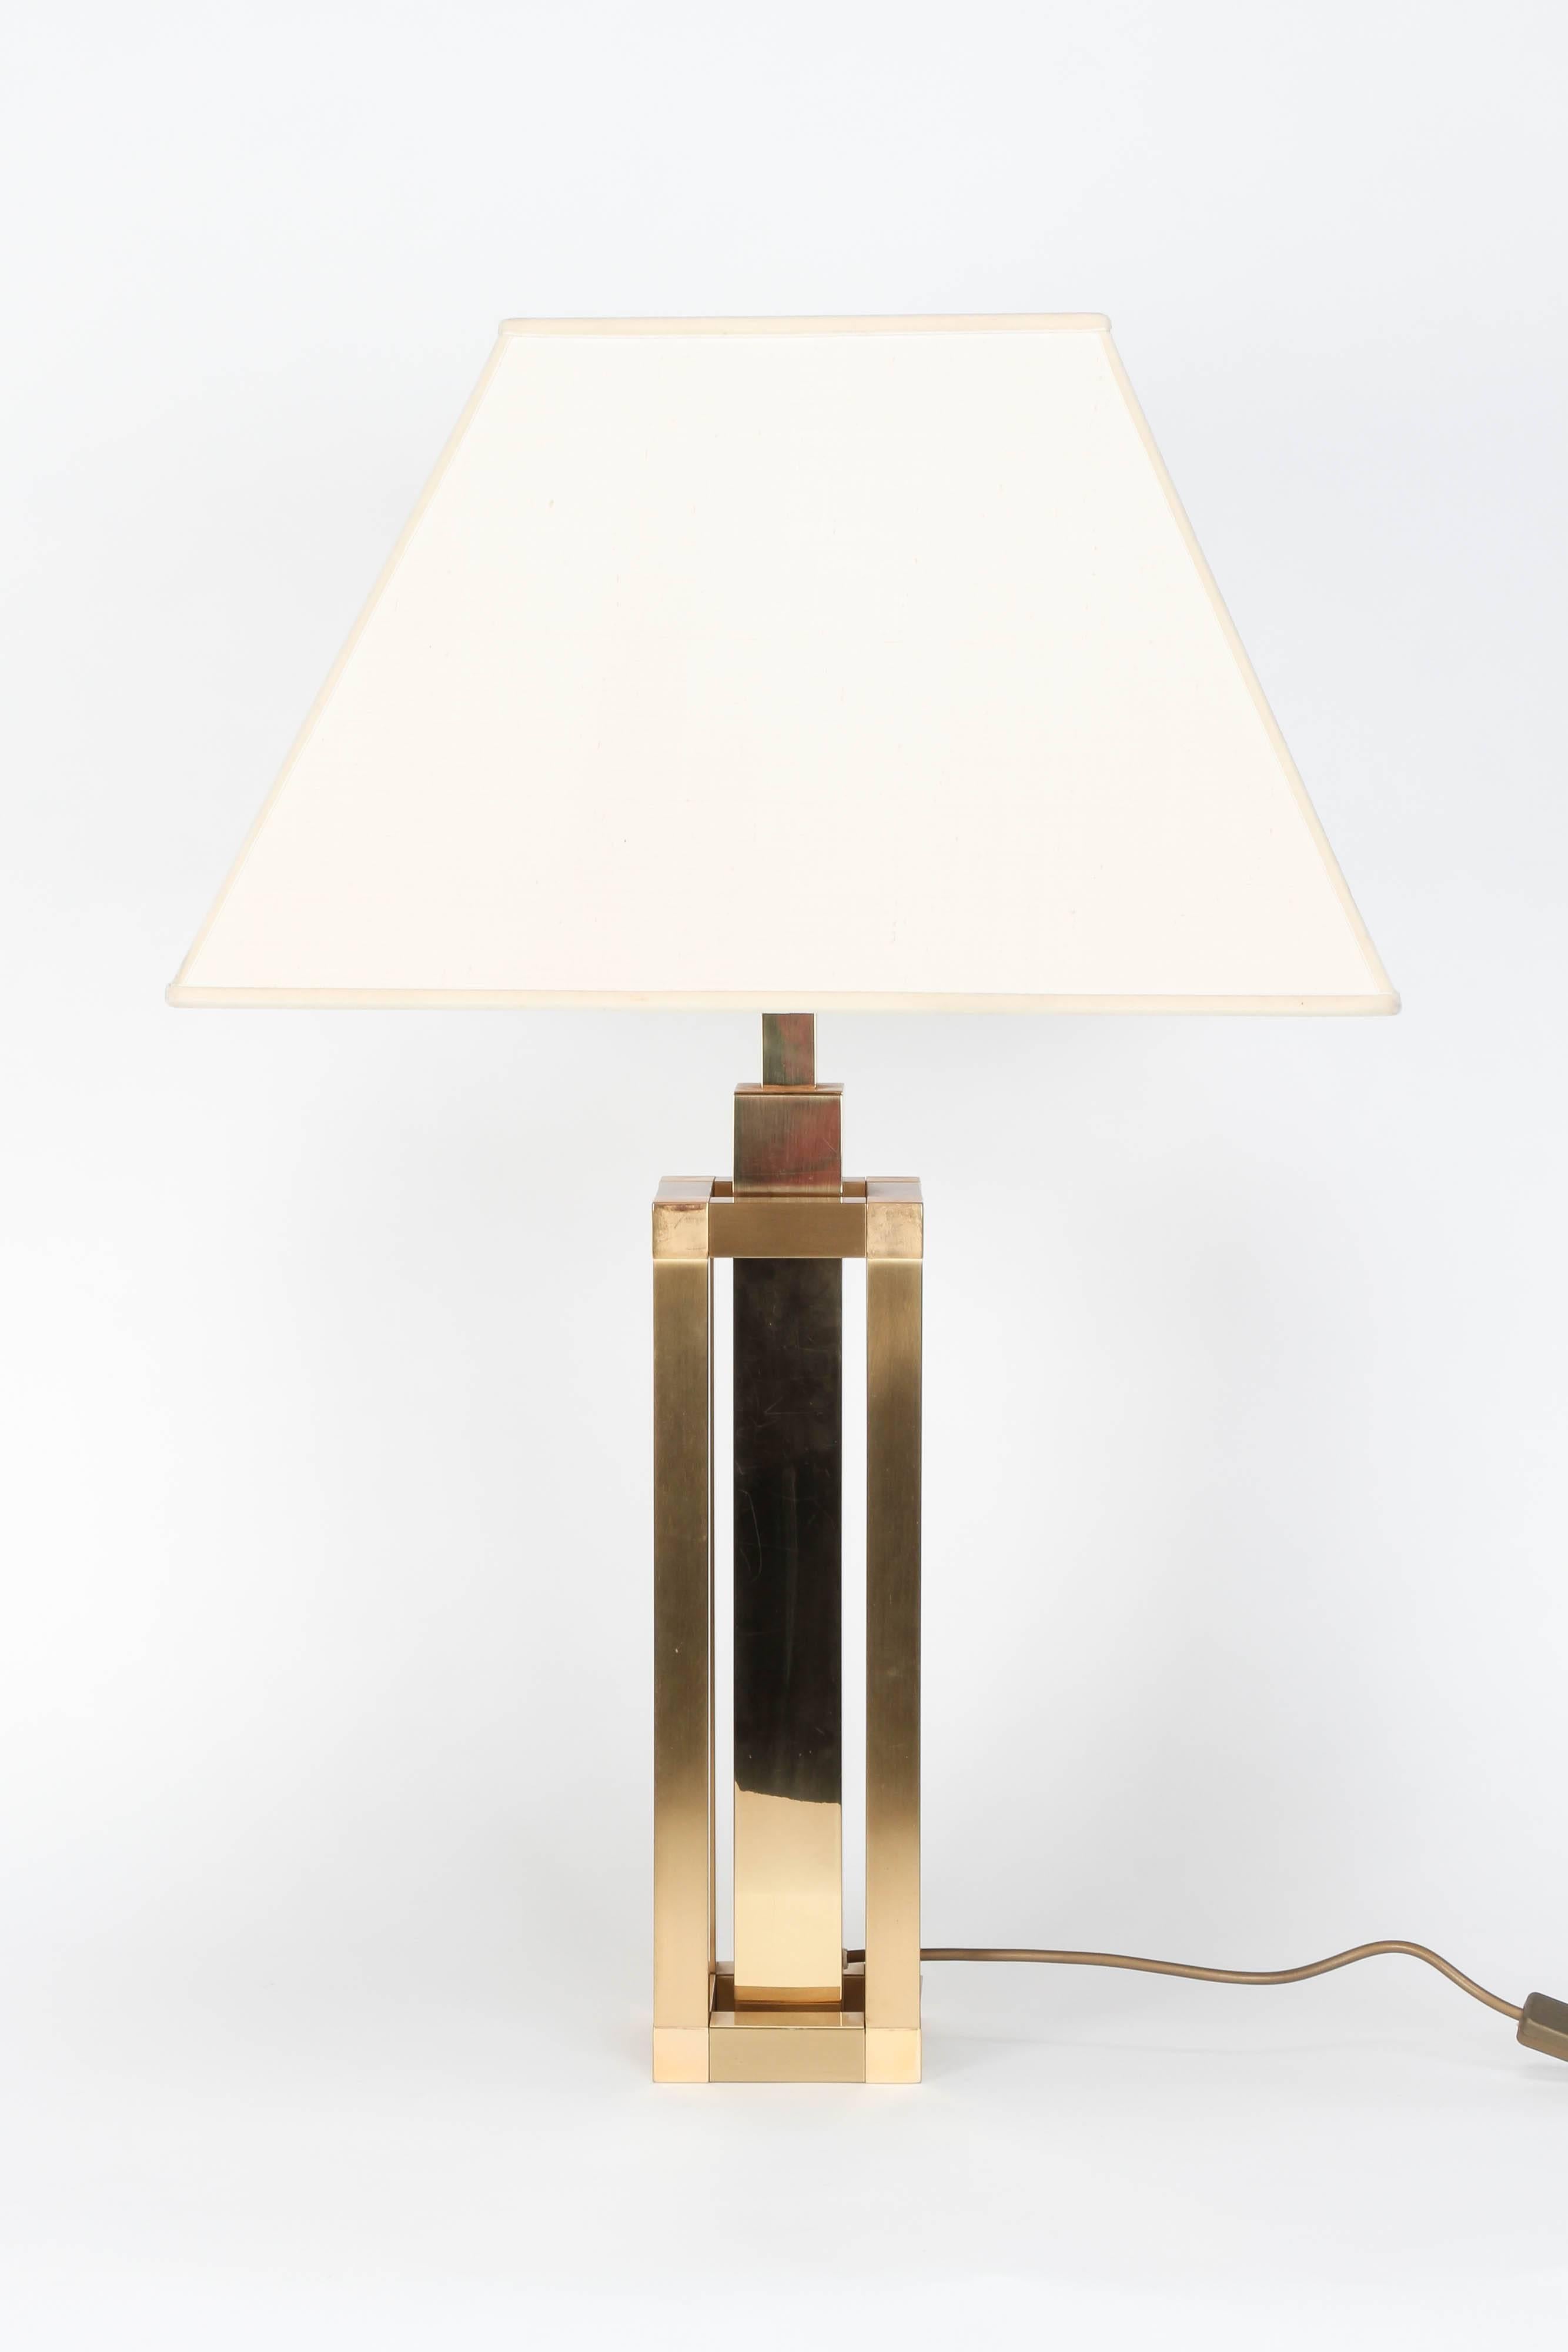 Rare Romeo Rega table lamp manufactured in the 1970s. Geometrical stem made of brass, dull and polished parts, original raw silk shade.